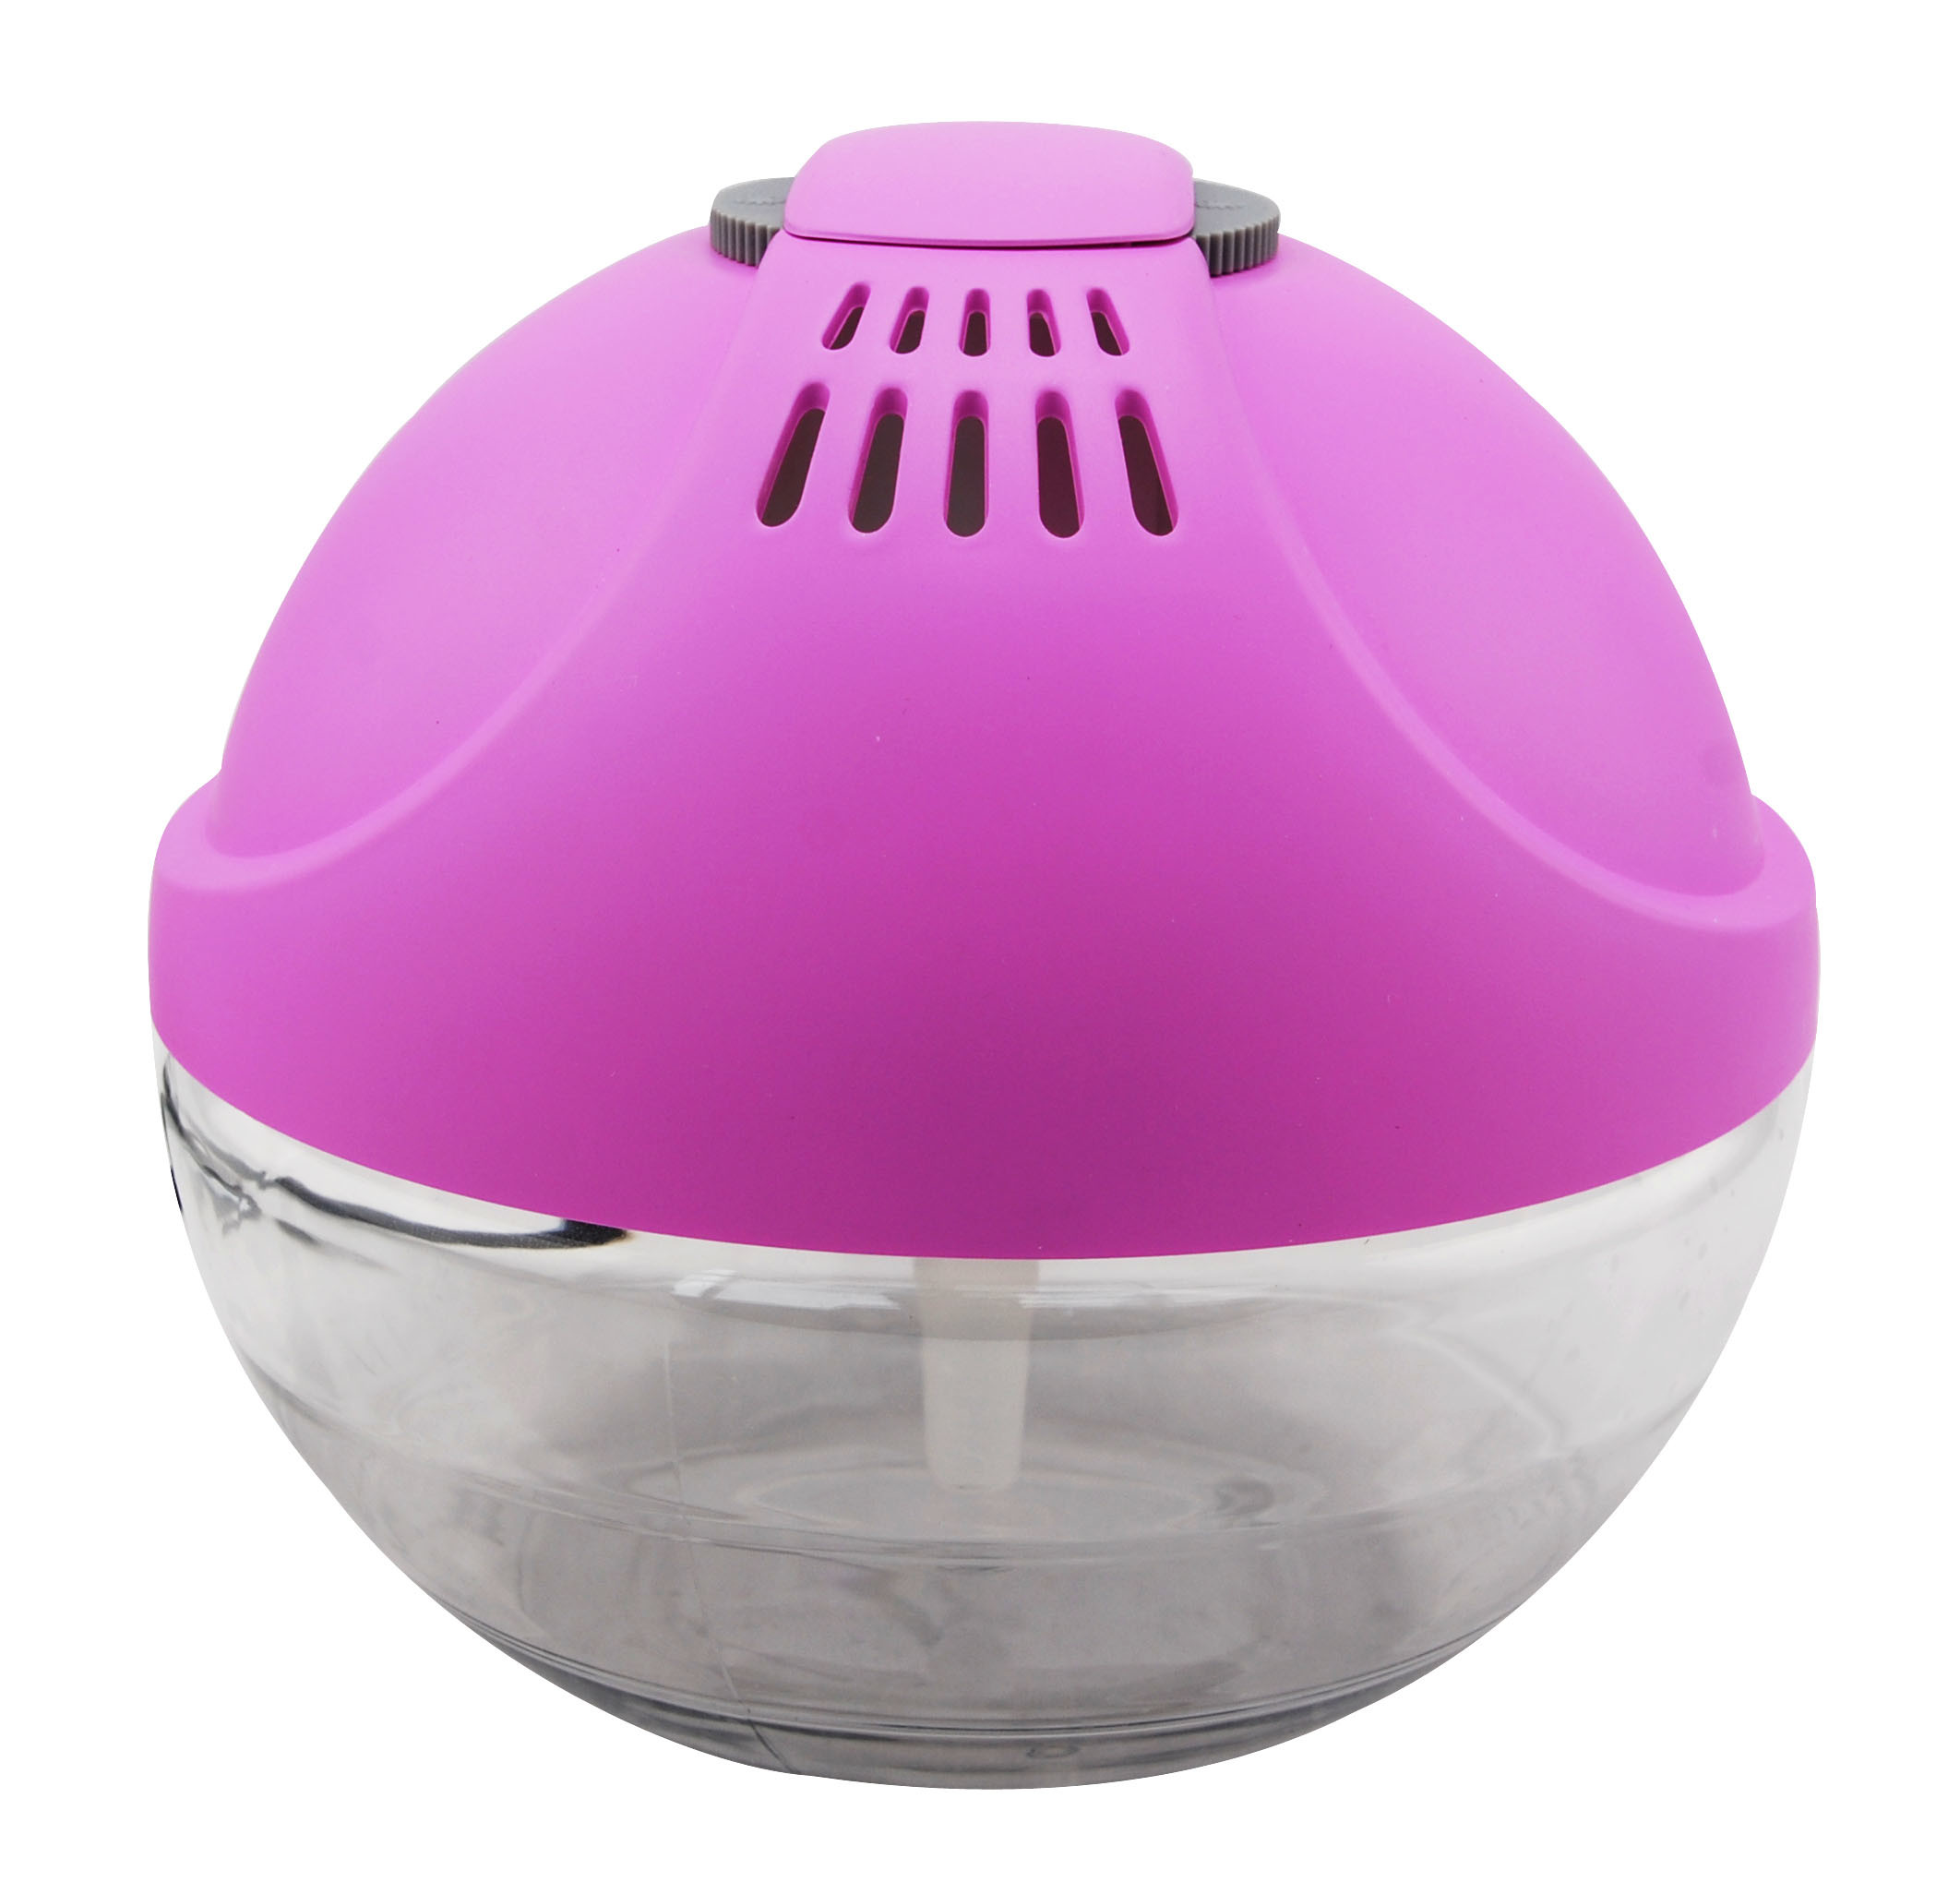 Best Automatic Electric Air Freshener Diffuser Or Dispenser Home Office Hotel Use wholesale